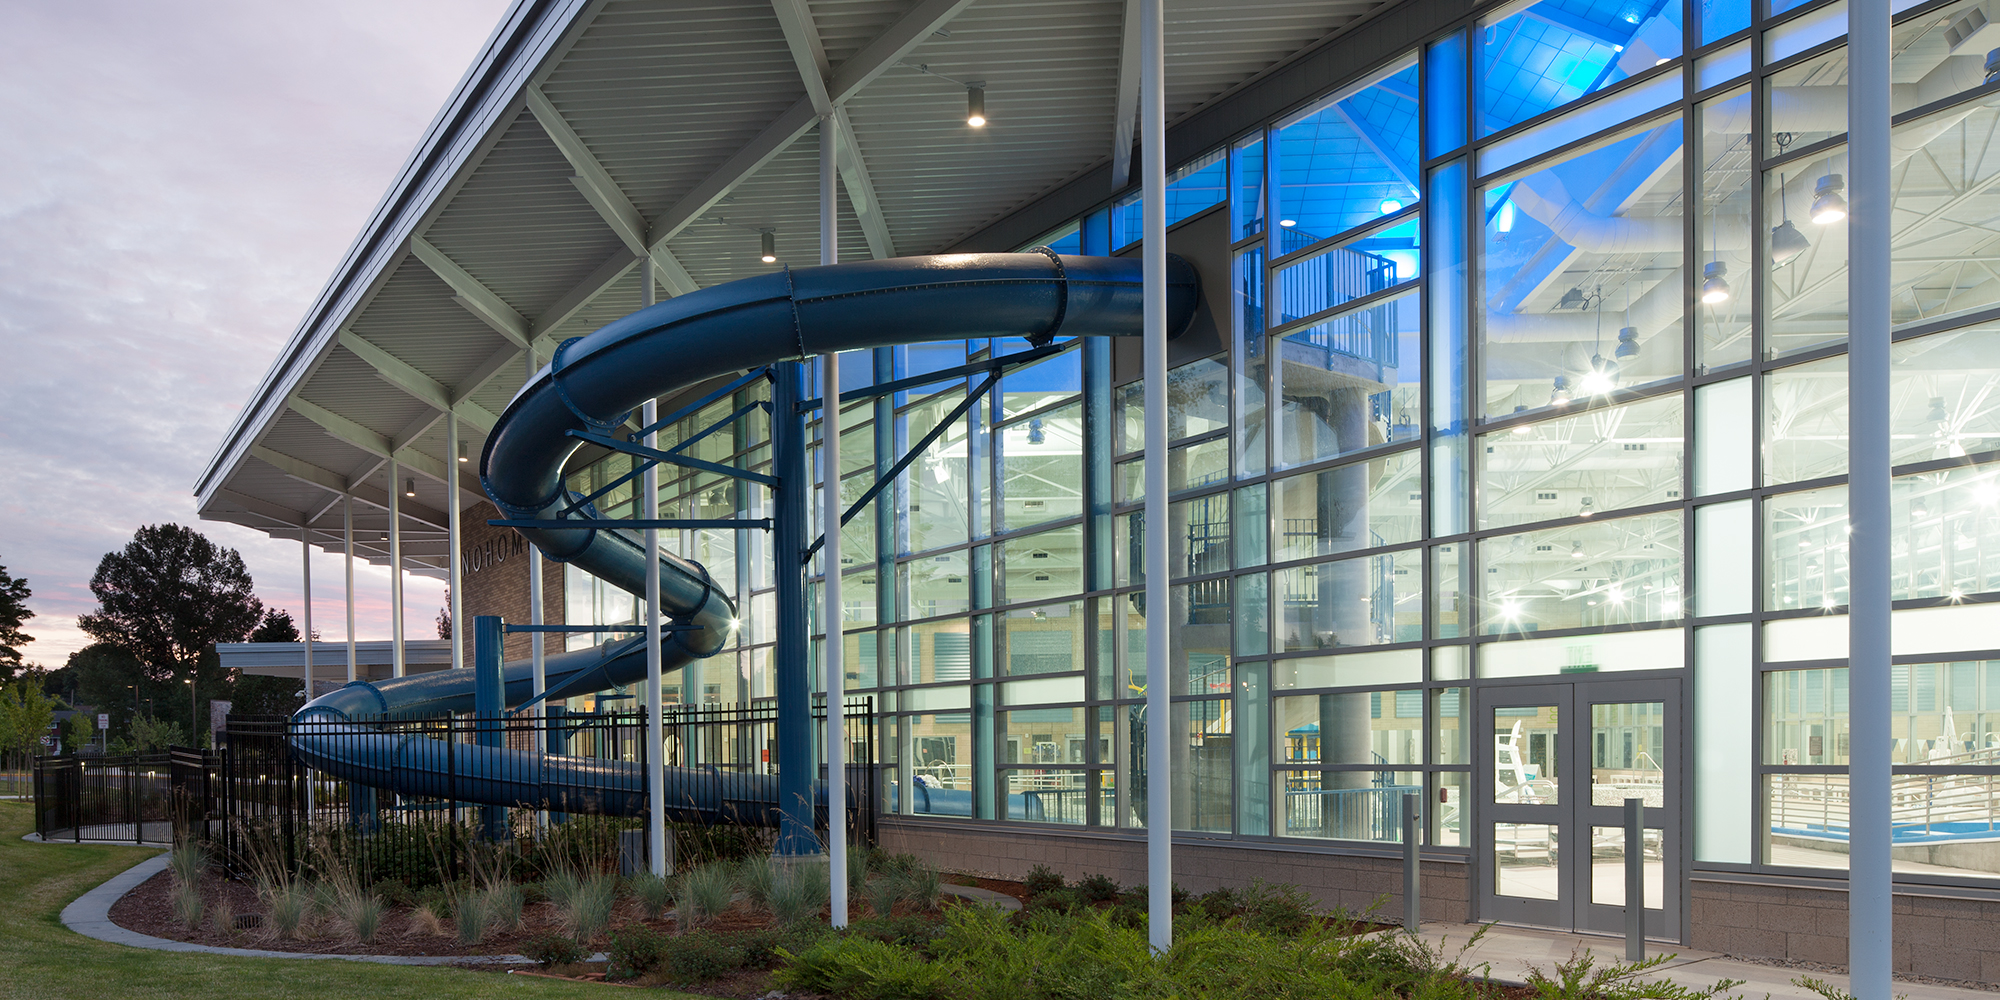 Exterior view of waterslide outside Snohomish Aquatic Center